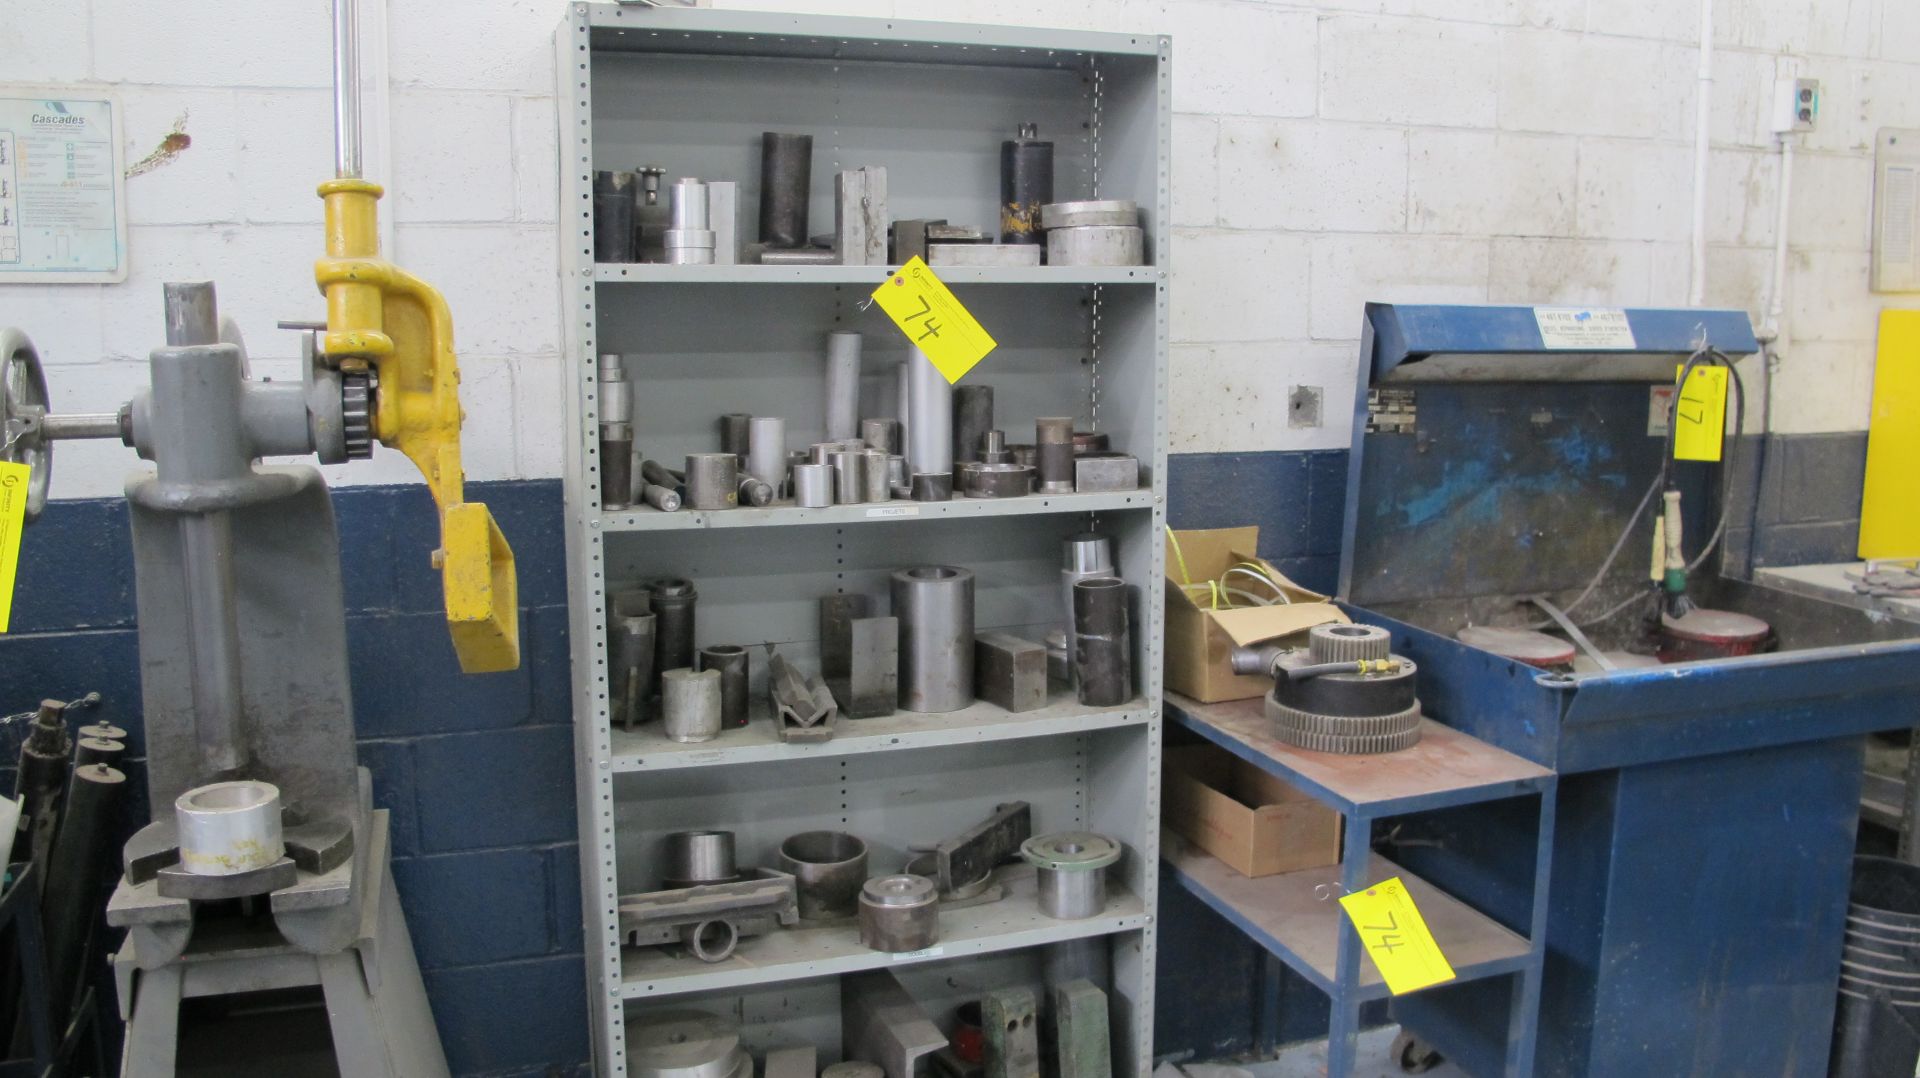 6-LEVEL METAL SHELVING UNIT W/ METAL CONTENTS AND TABLE W/ GEARS, ETC. (MACHINE SHOP)